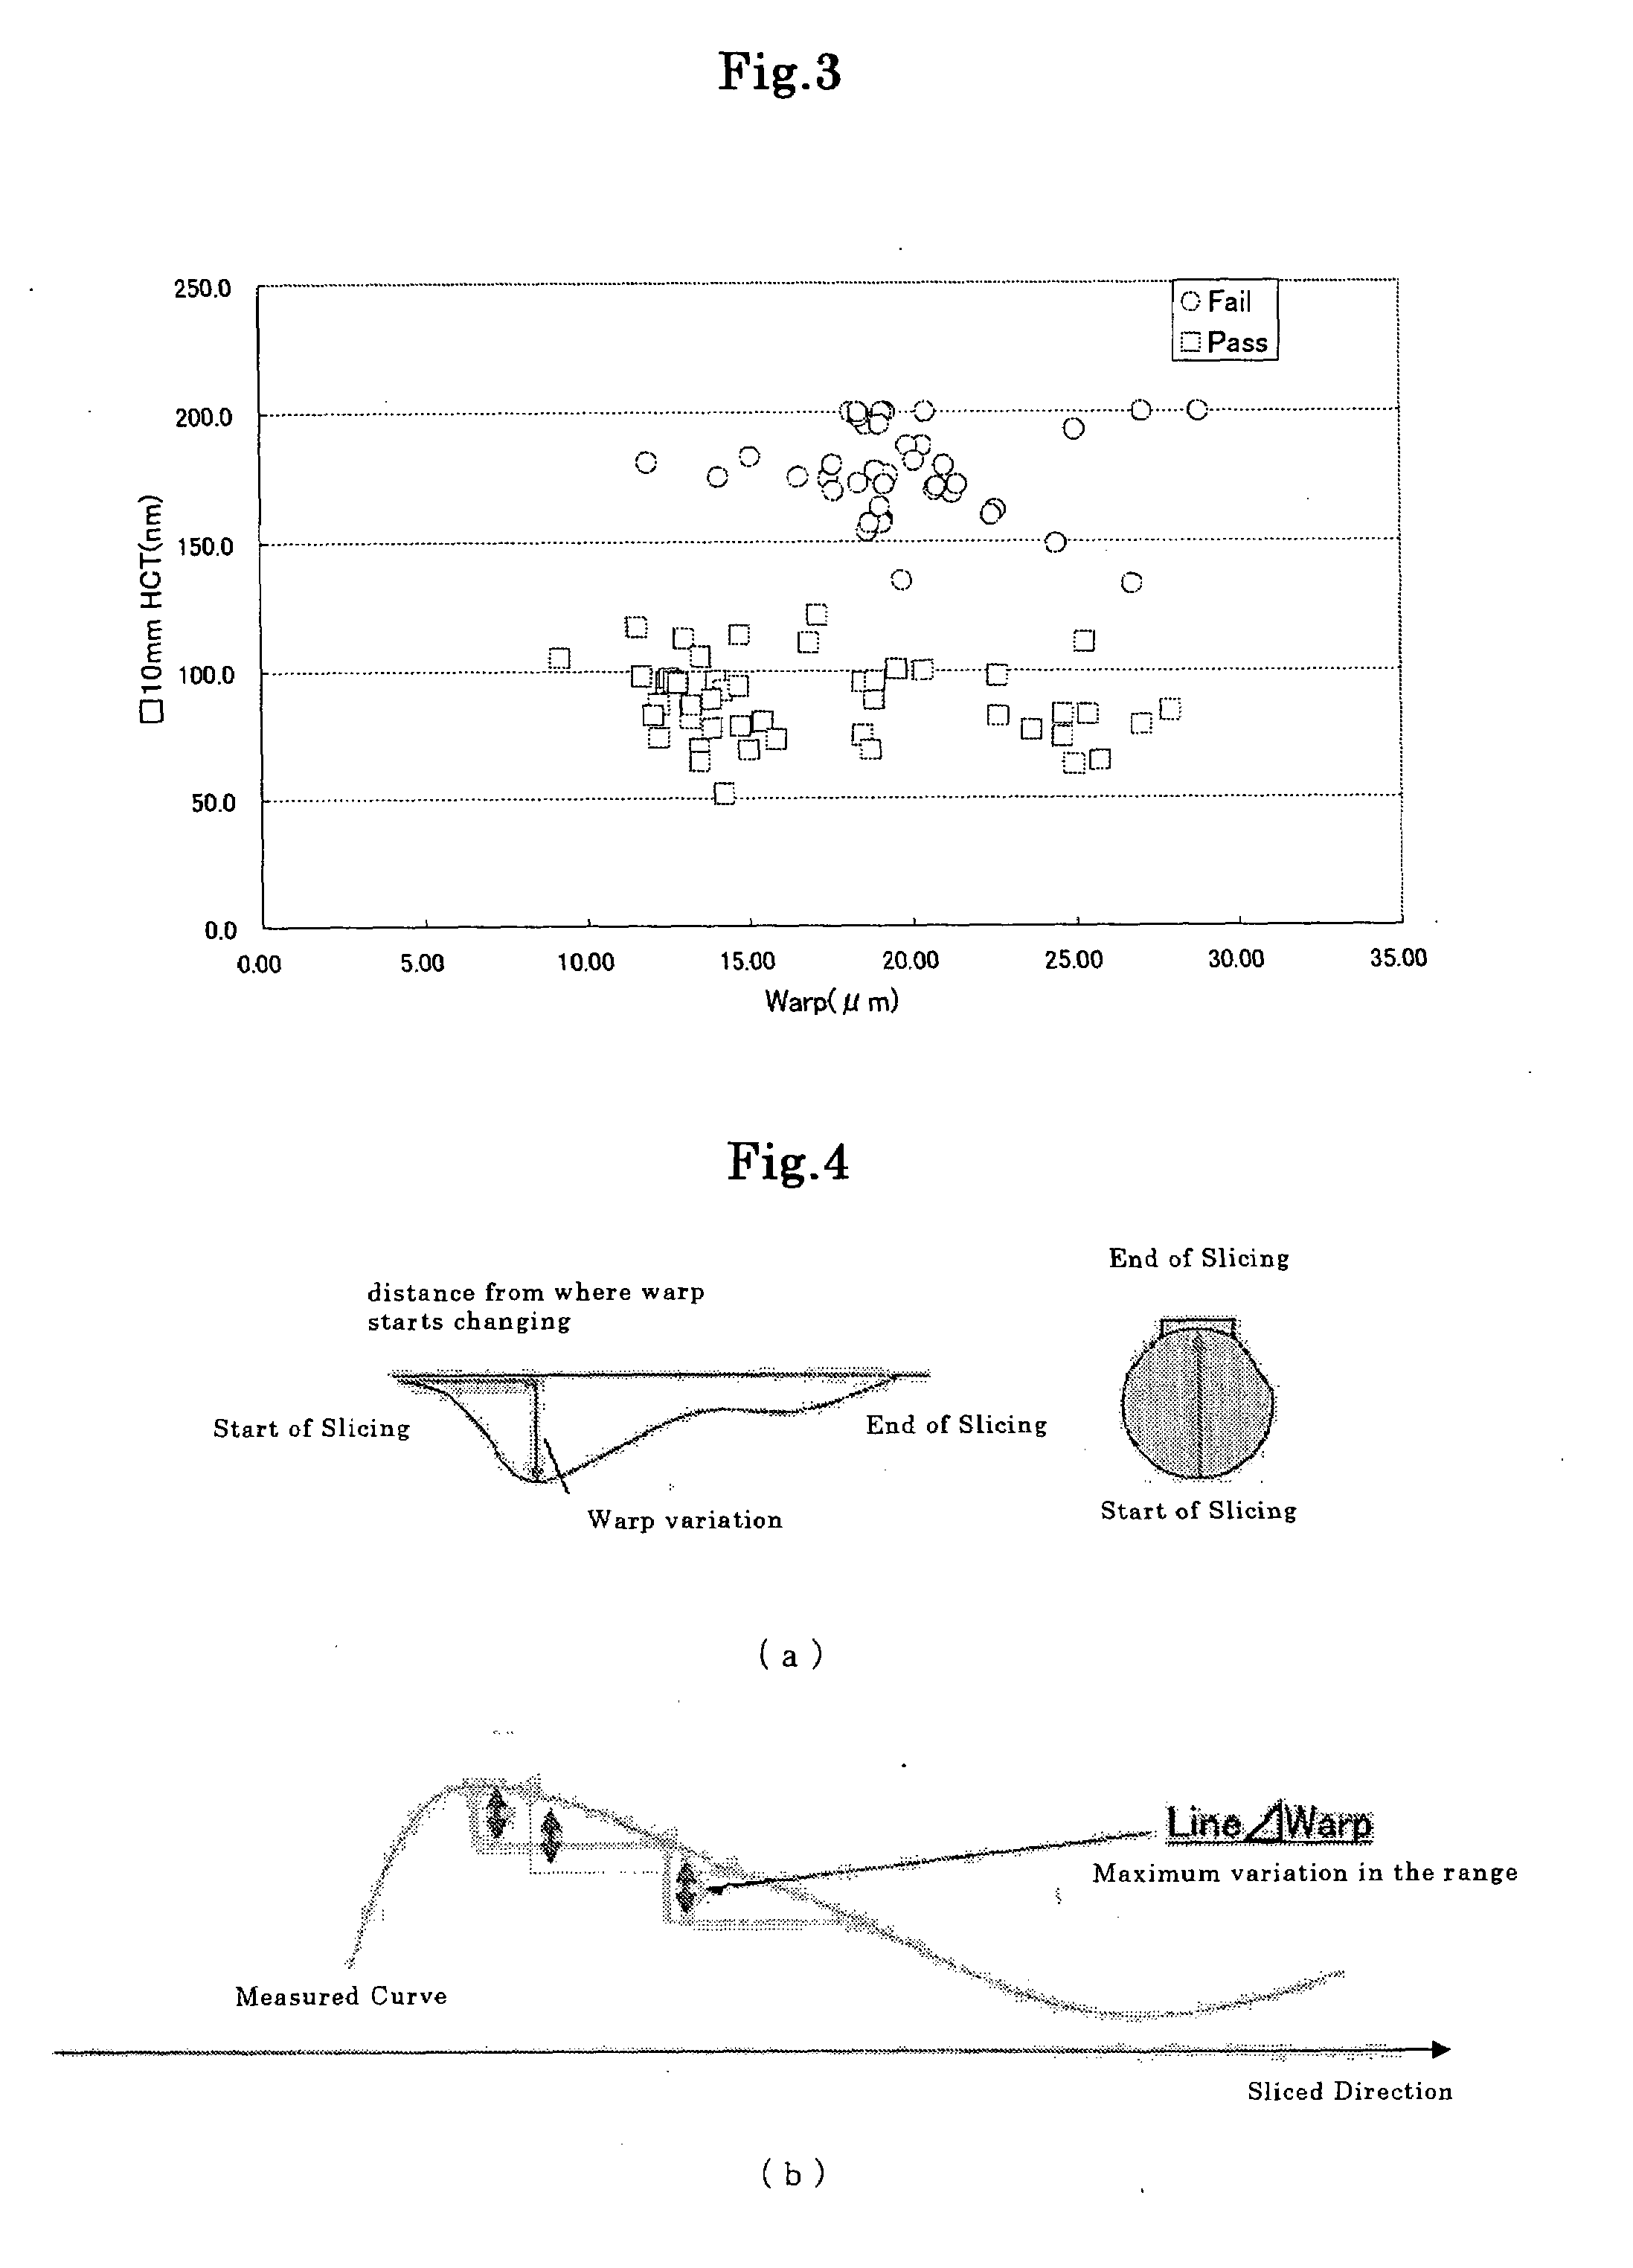 Method for Evaluating Semiconductor Wafer, Apparatus for Evaluating Semiconductor Wafer, and Method for Manufacturing Semiconductor Wafer